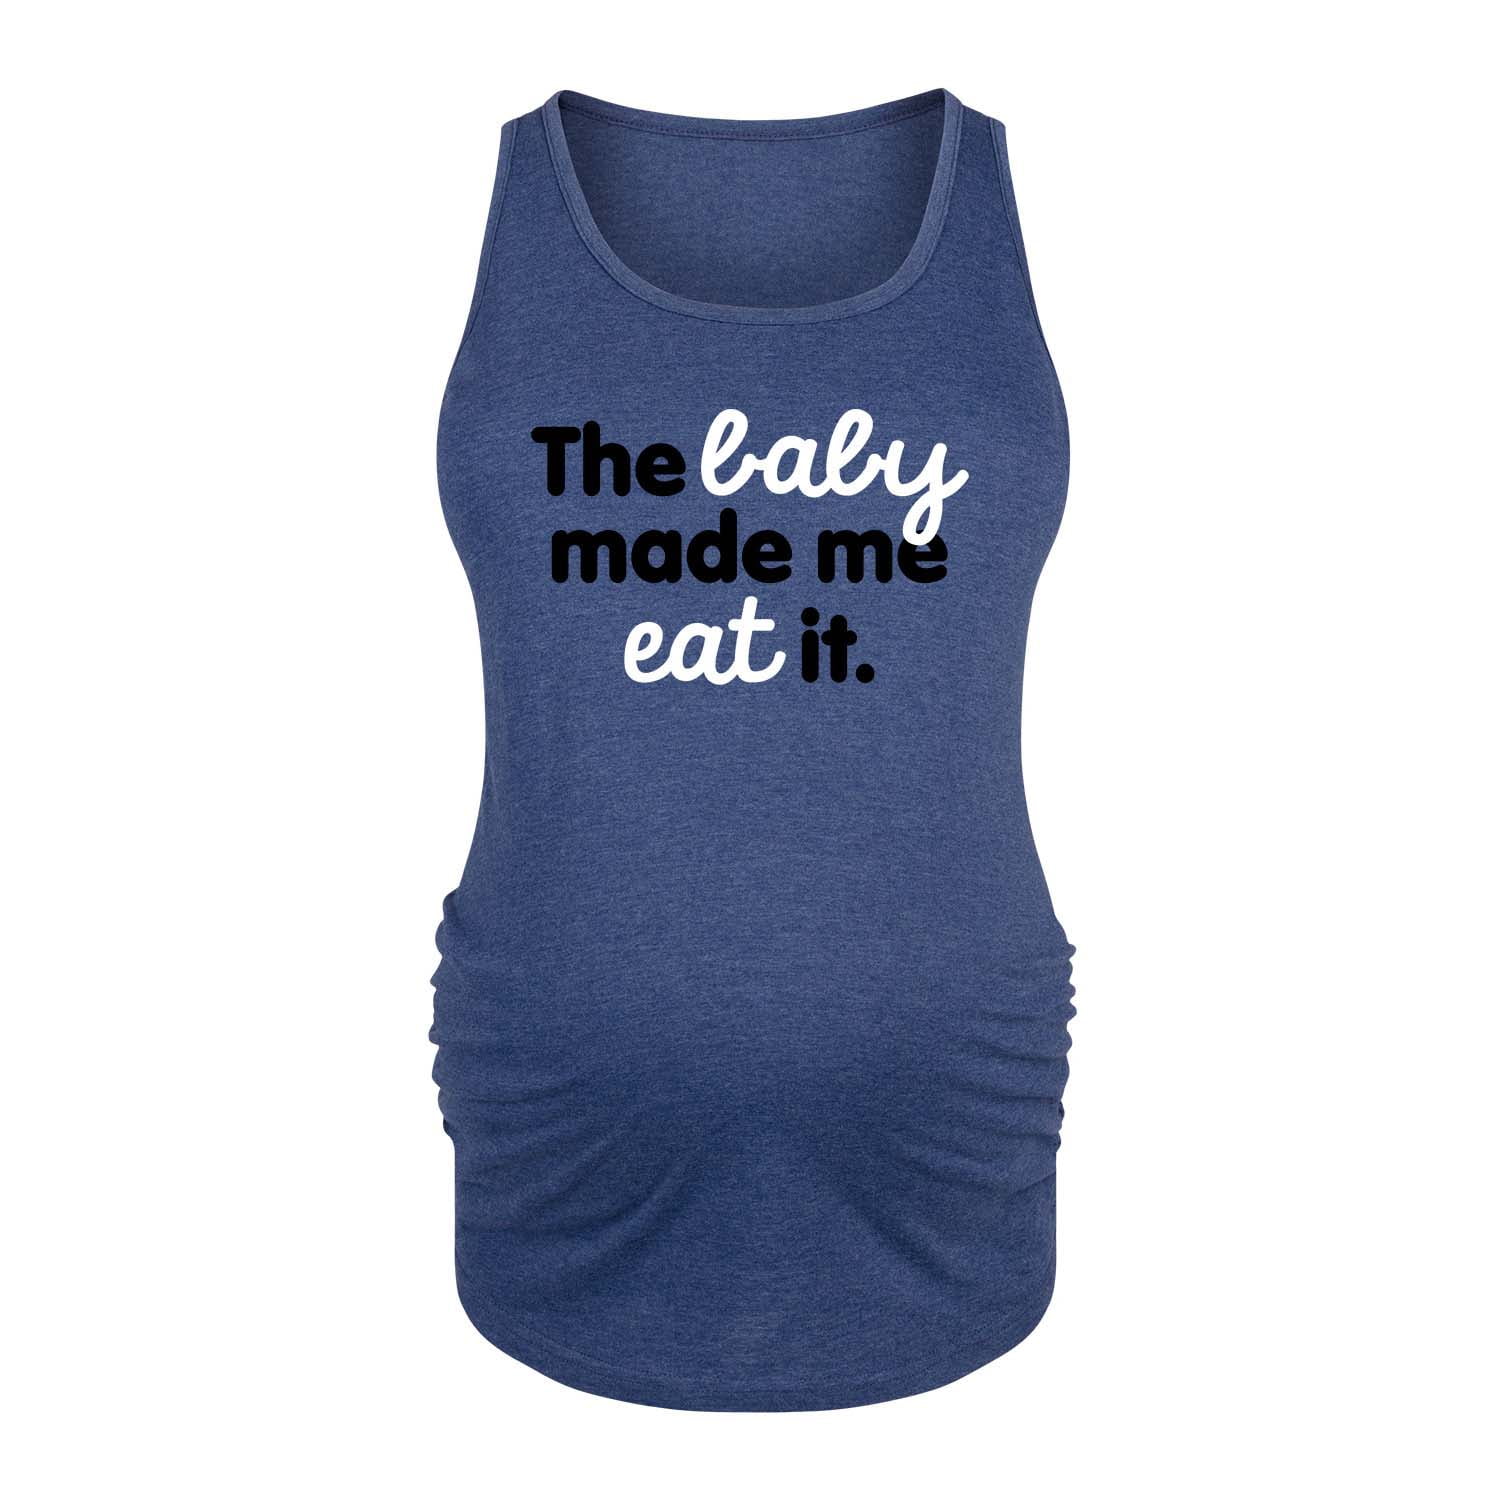 Women's Maternity Graphic Tank Top Bloom Maternity The Baby Made Me Eat It 